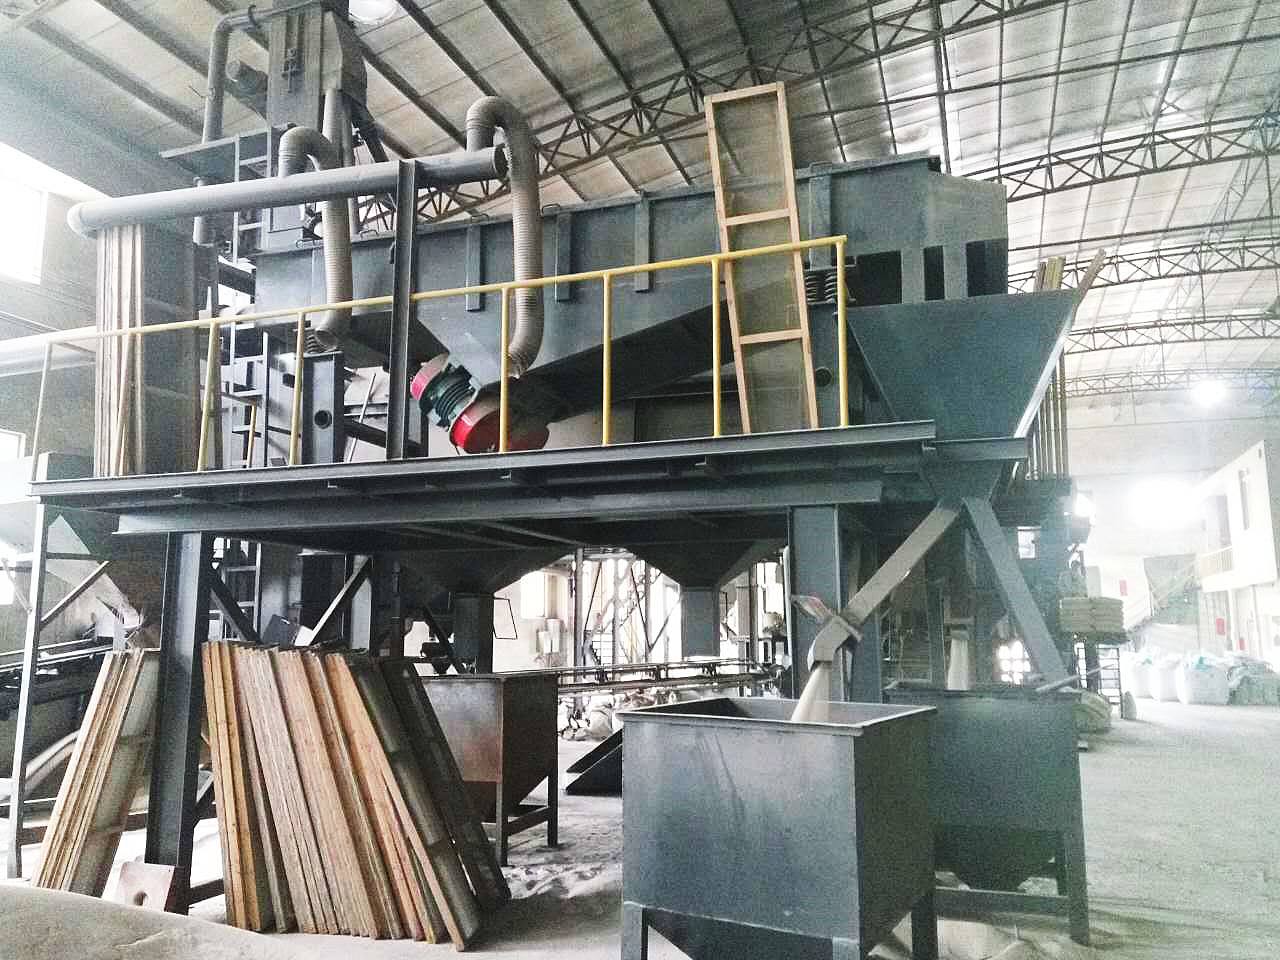 Xxnx hot sorting linear vibrating screen double layer sieve machine for quartz sand